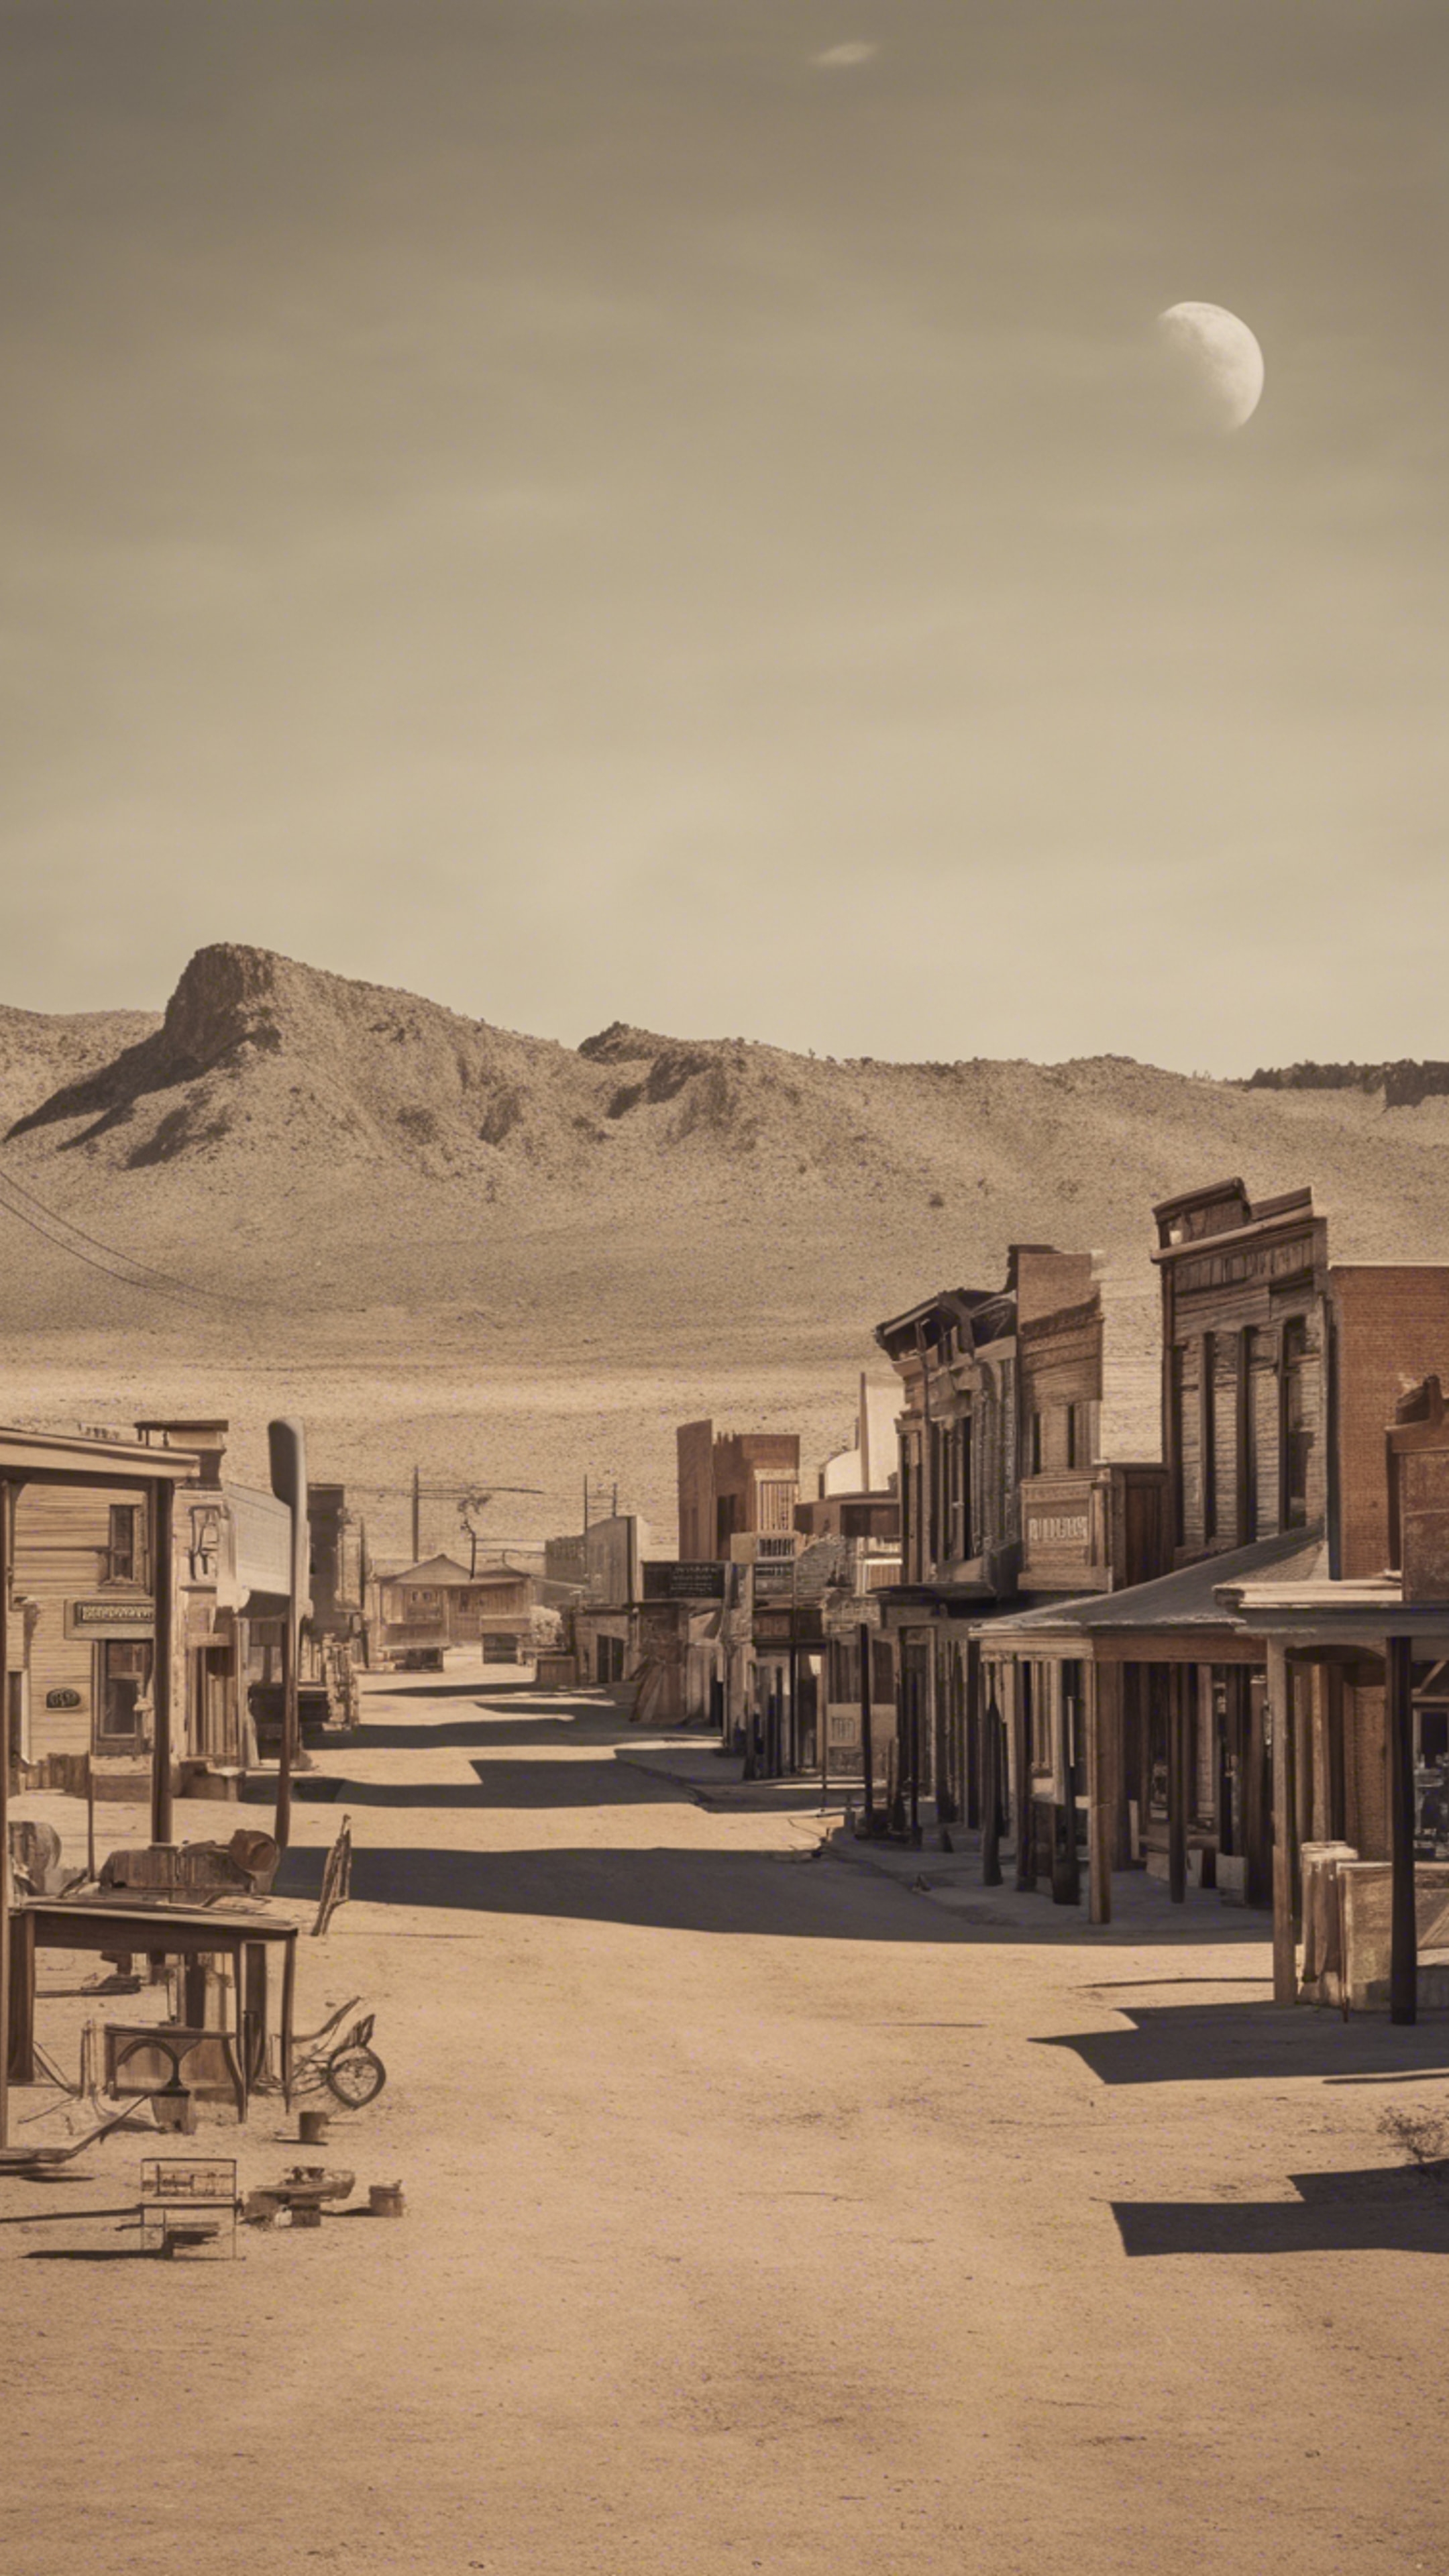 A nostalgic portrayal of a deserted old western town skyline at high noon. Behang[6f3773f399464a7985e4]